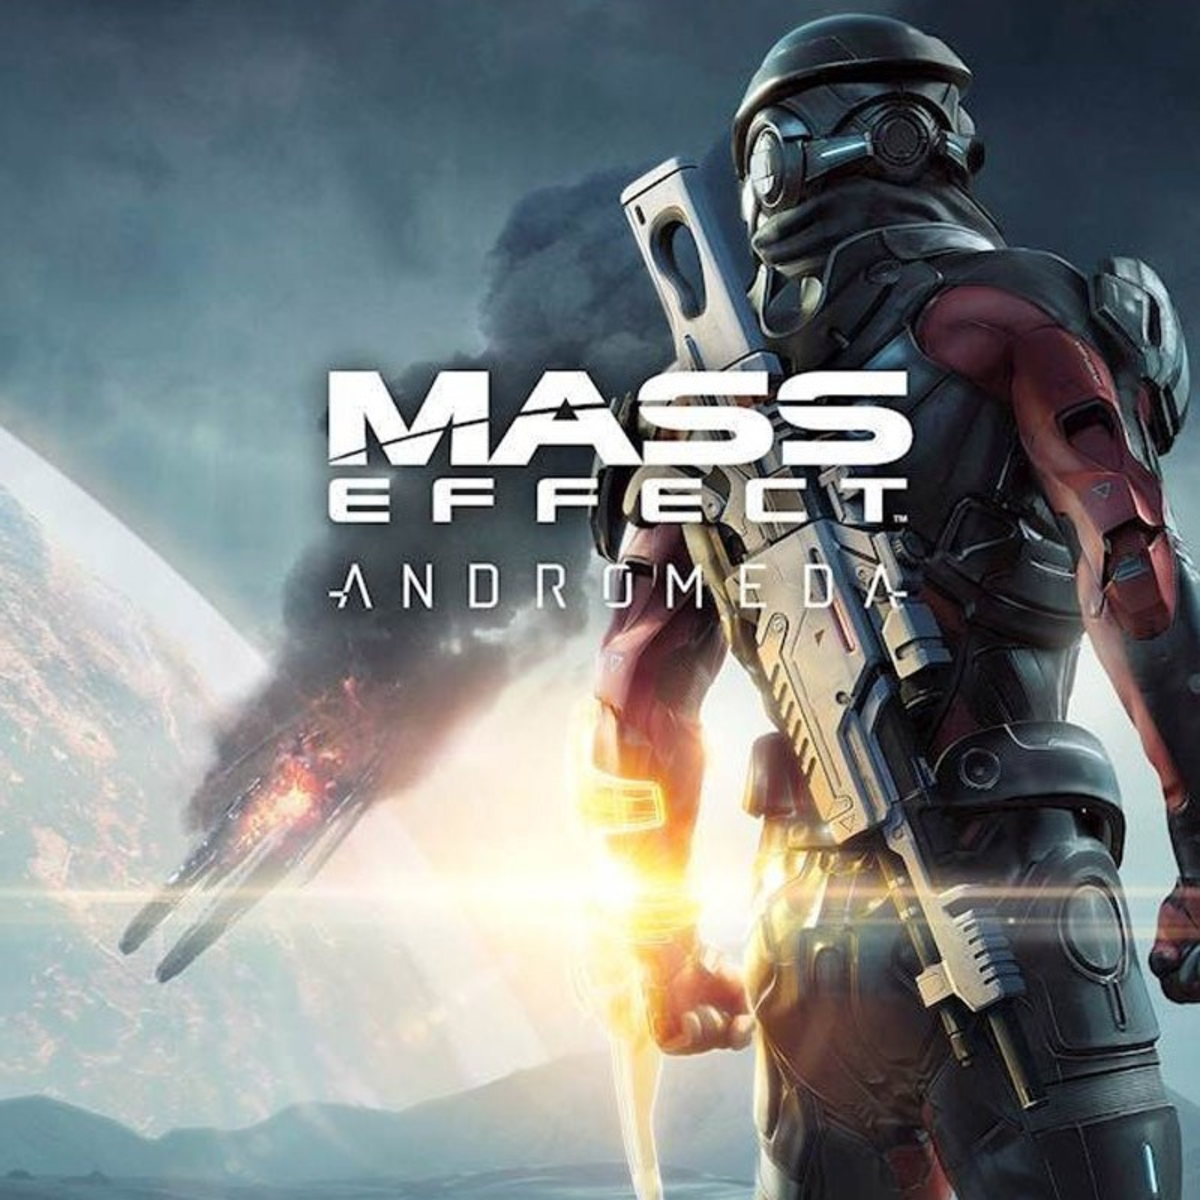 nomad-mass-effect-andromeda